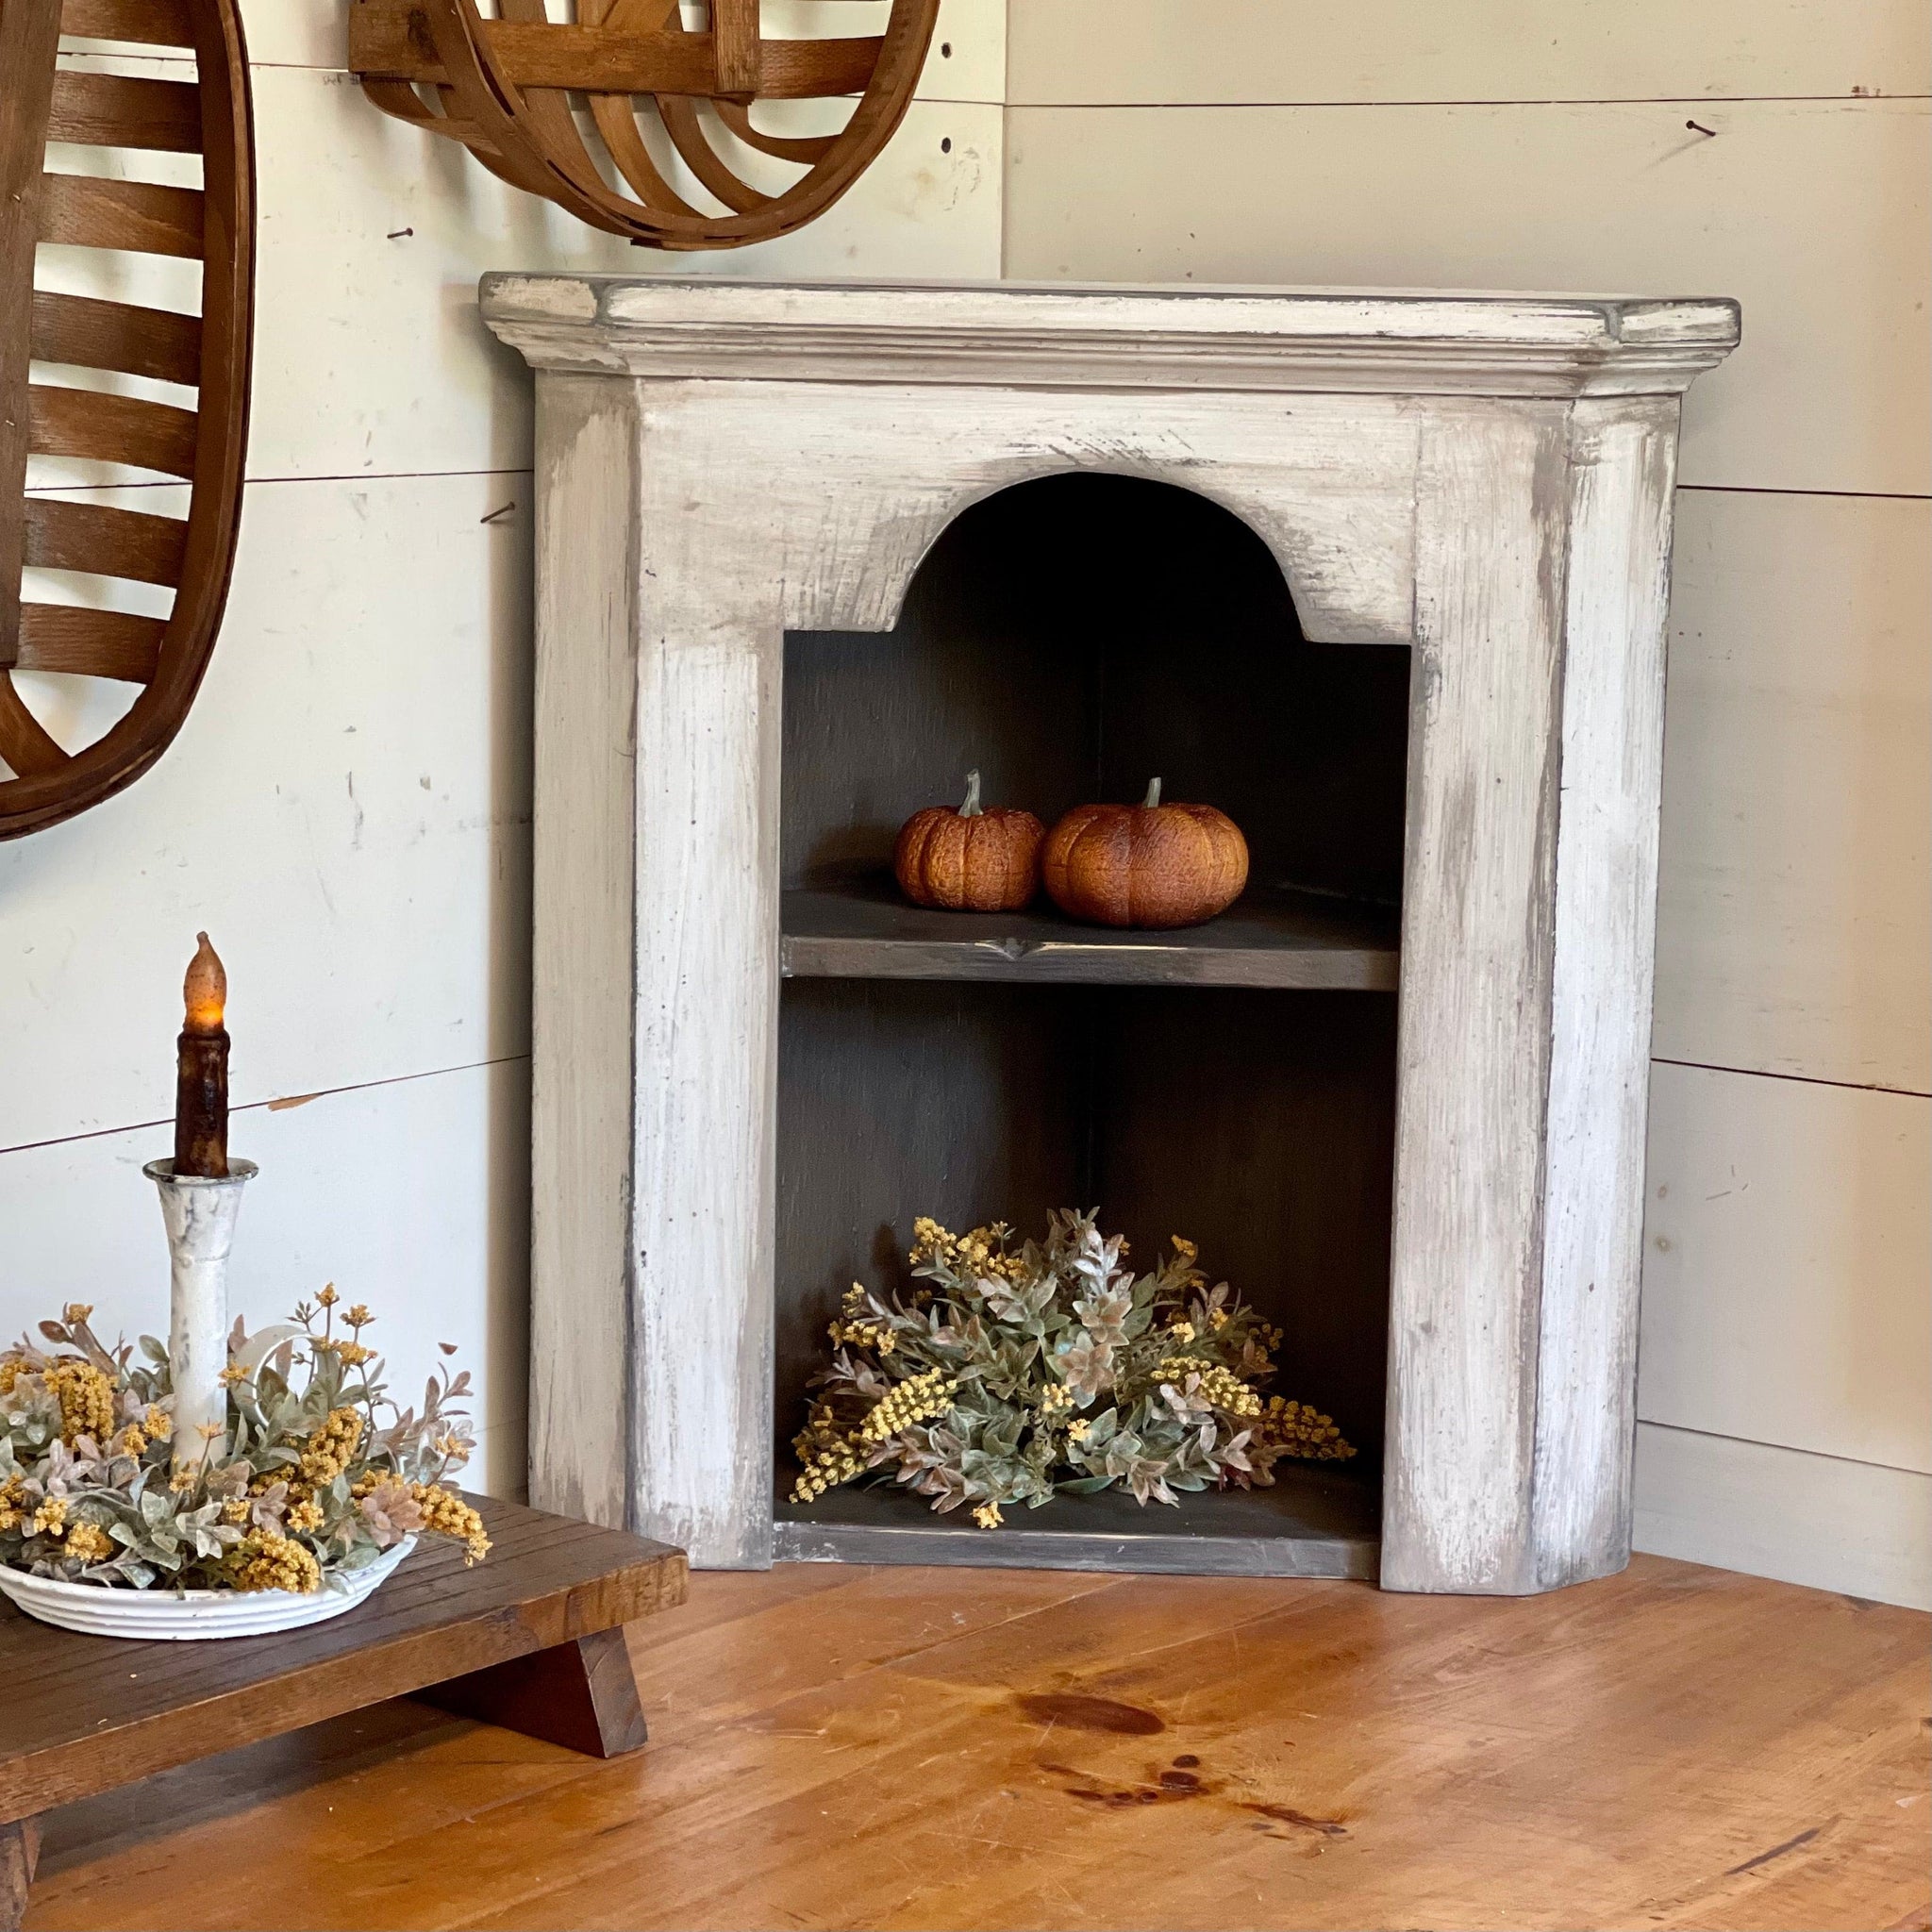 Tombstone Corner Cupboard - Rustic White - Only 1 Available! For Sale, in stock, new, ready to ship, Smalls Tombstone Corner Cupboard - Rustic White - Only 1 Available! For Sale, in stock, new, ready to ship, Smalls 